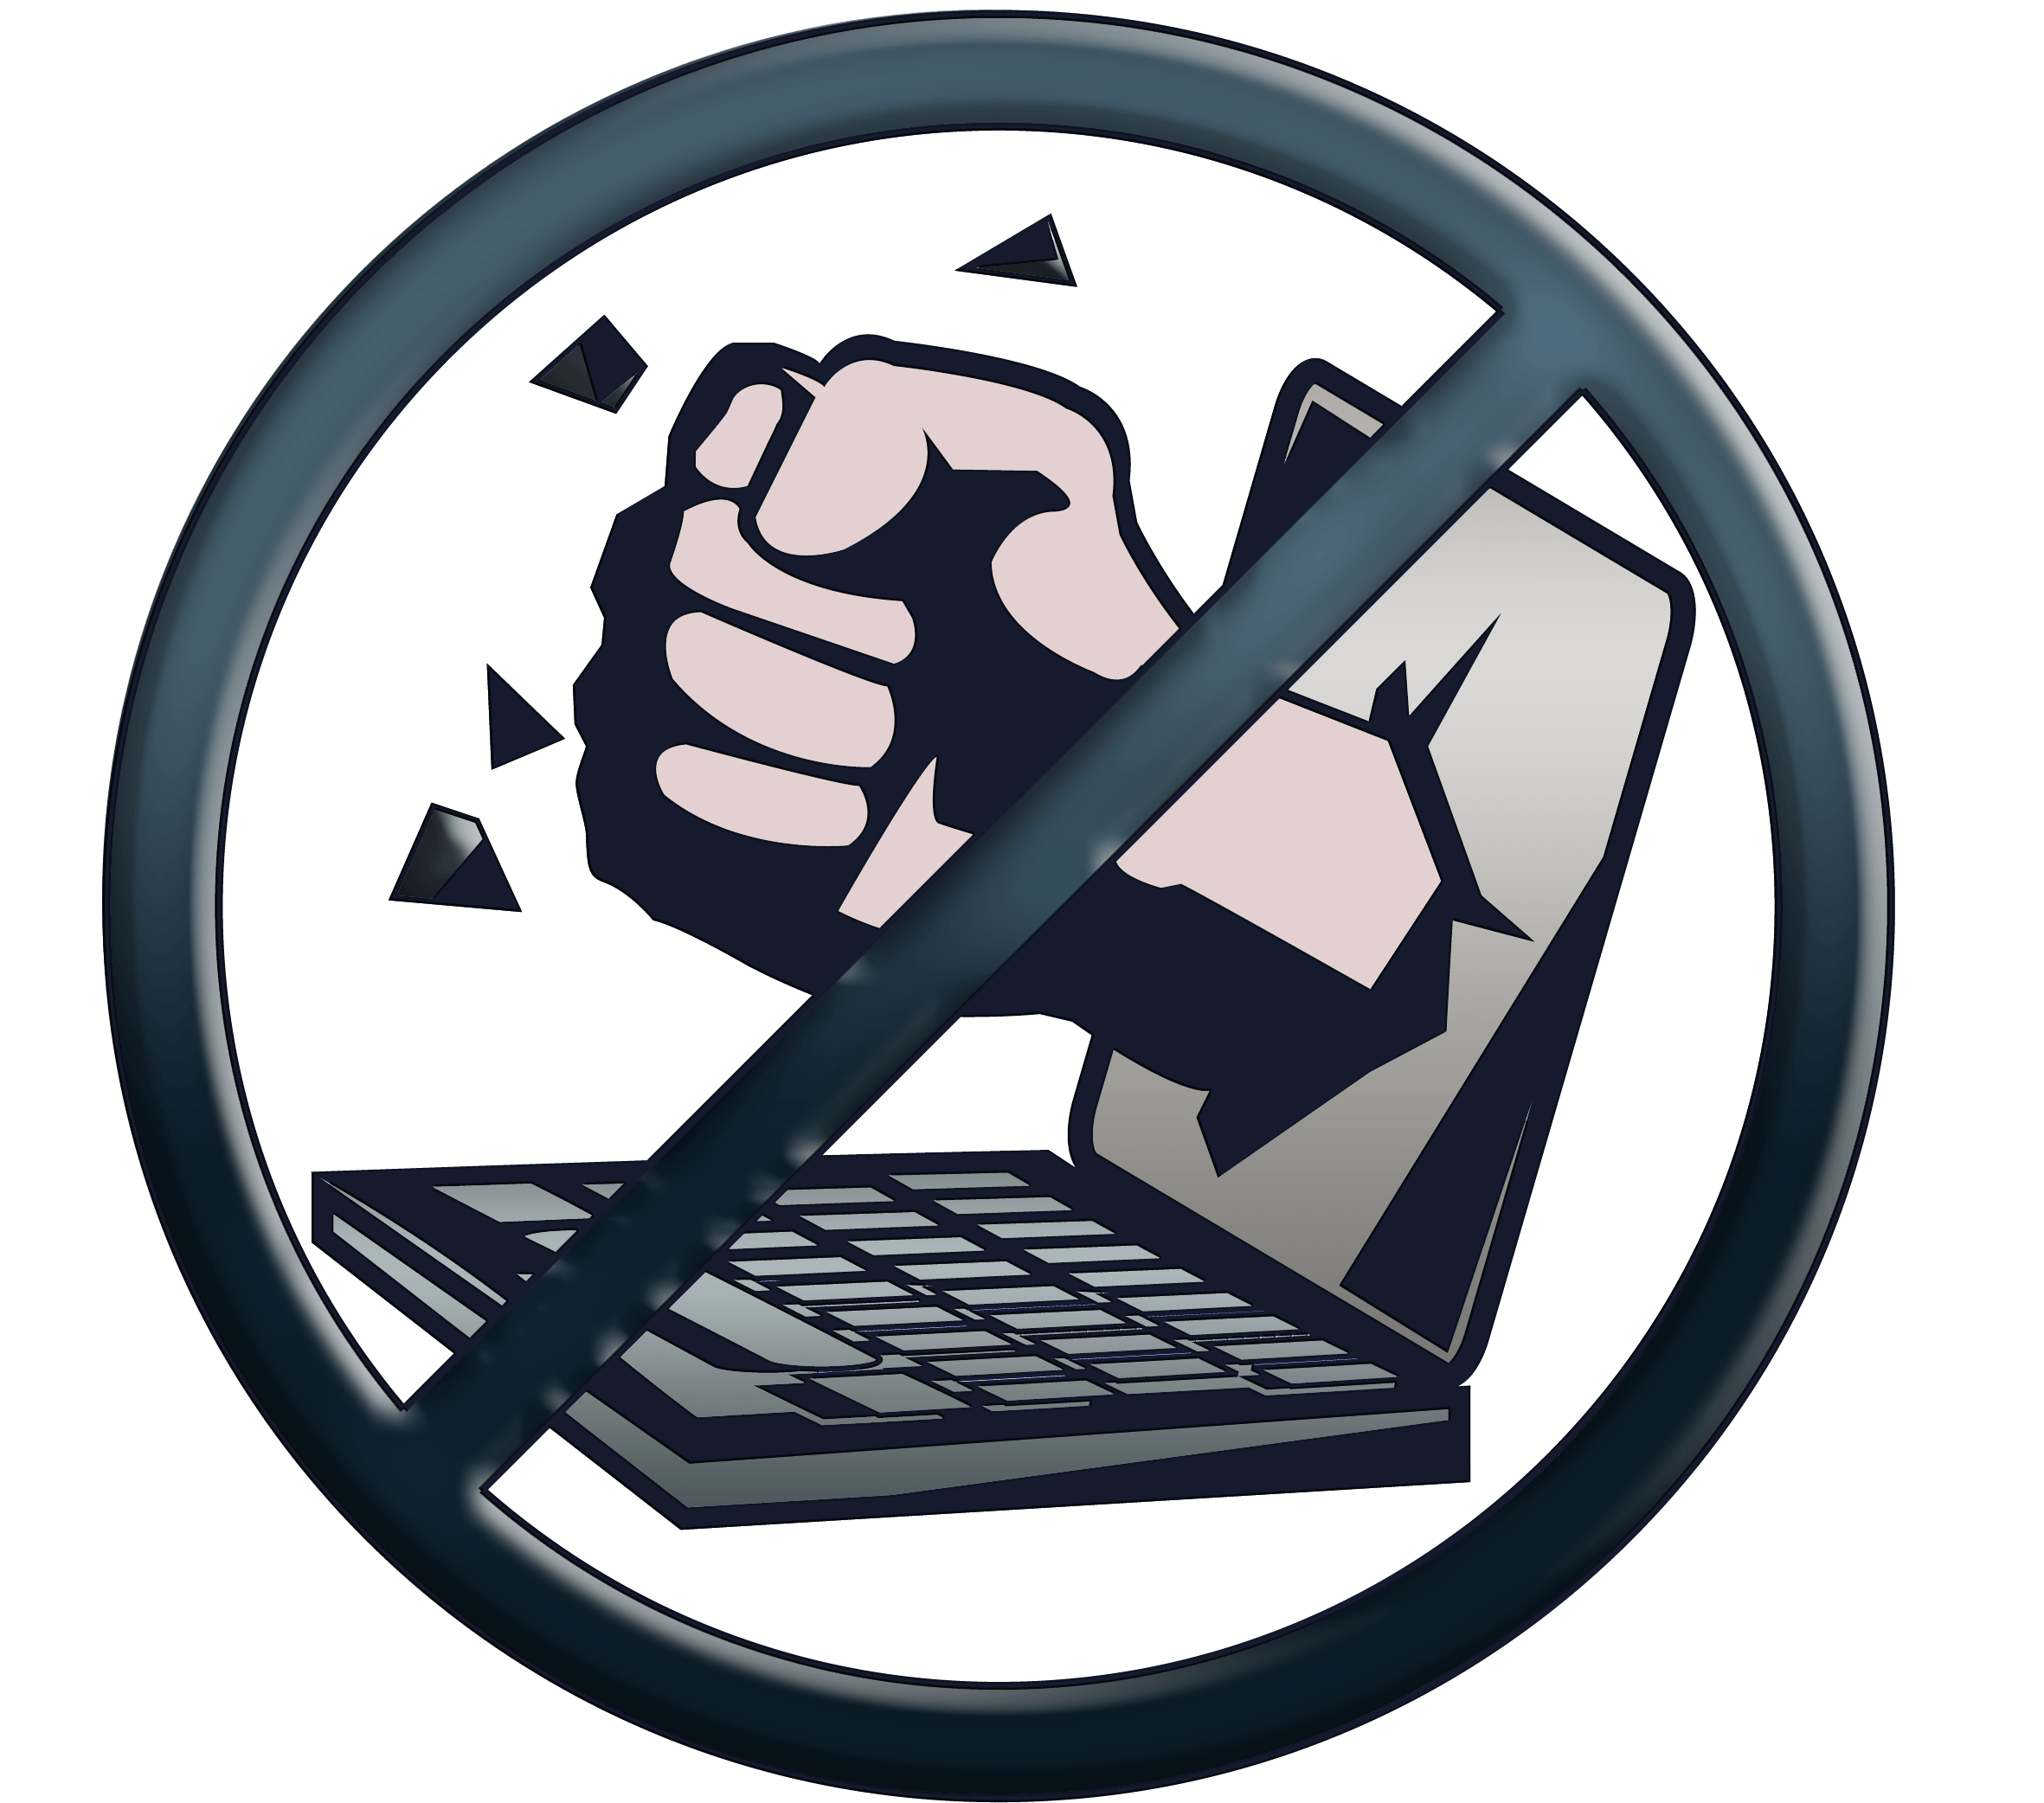 Cyberbullying Logo - Cyberbullying: A serious problem, but not an epidemic to Cyber